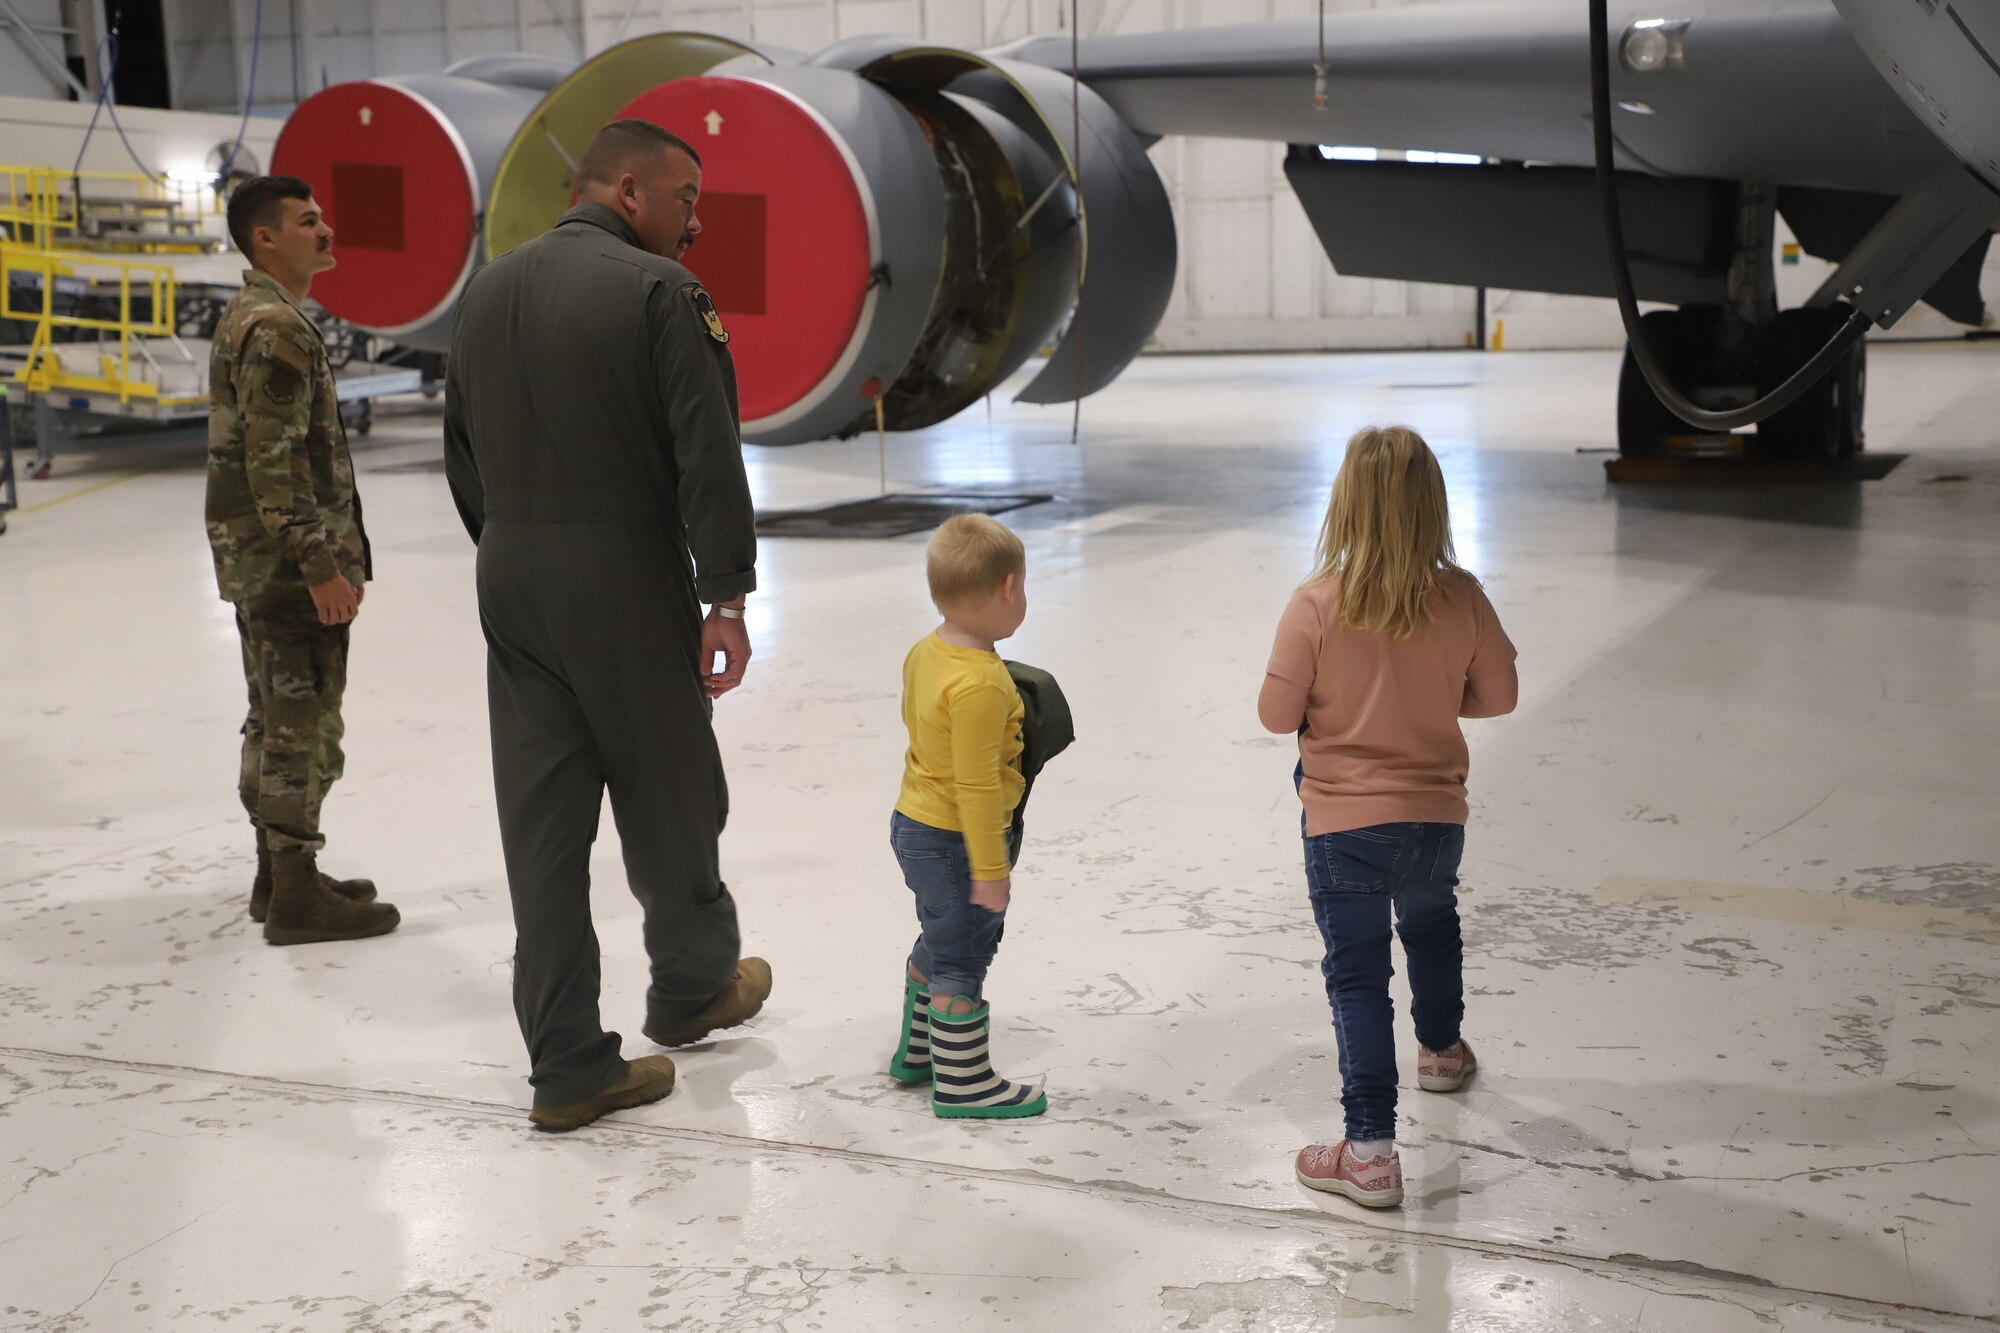 Tinley Benyshek, Pilot for the Day, and her brother, Trip, are shown the wings of a KC-135 by SMSgt Nathan Neidhardt, Senior Evaluator Boom at the 190th Air Refueling Wing in Topeka, KS, October 24, 2022. Tinley is the first Pilot for a Day participant at the 190th ARW.